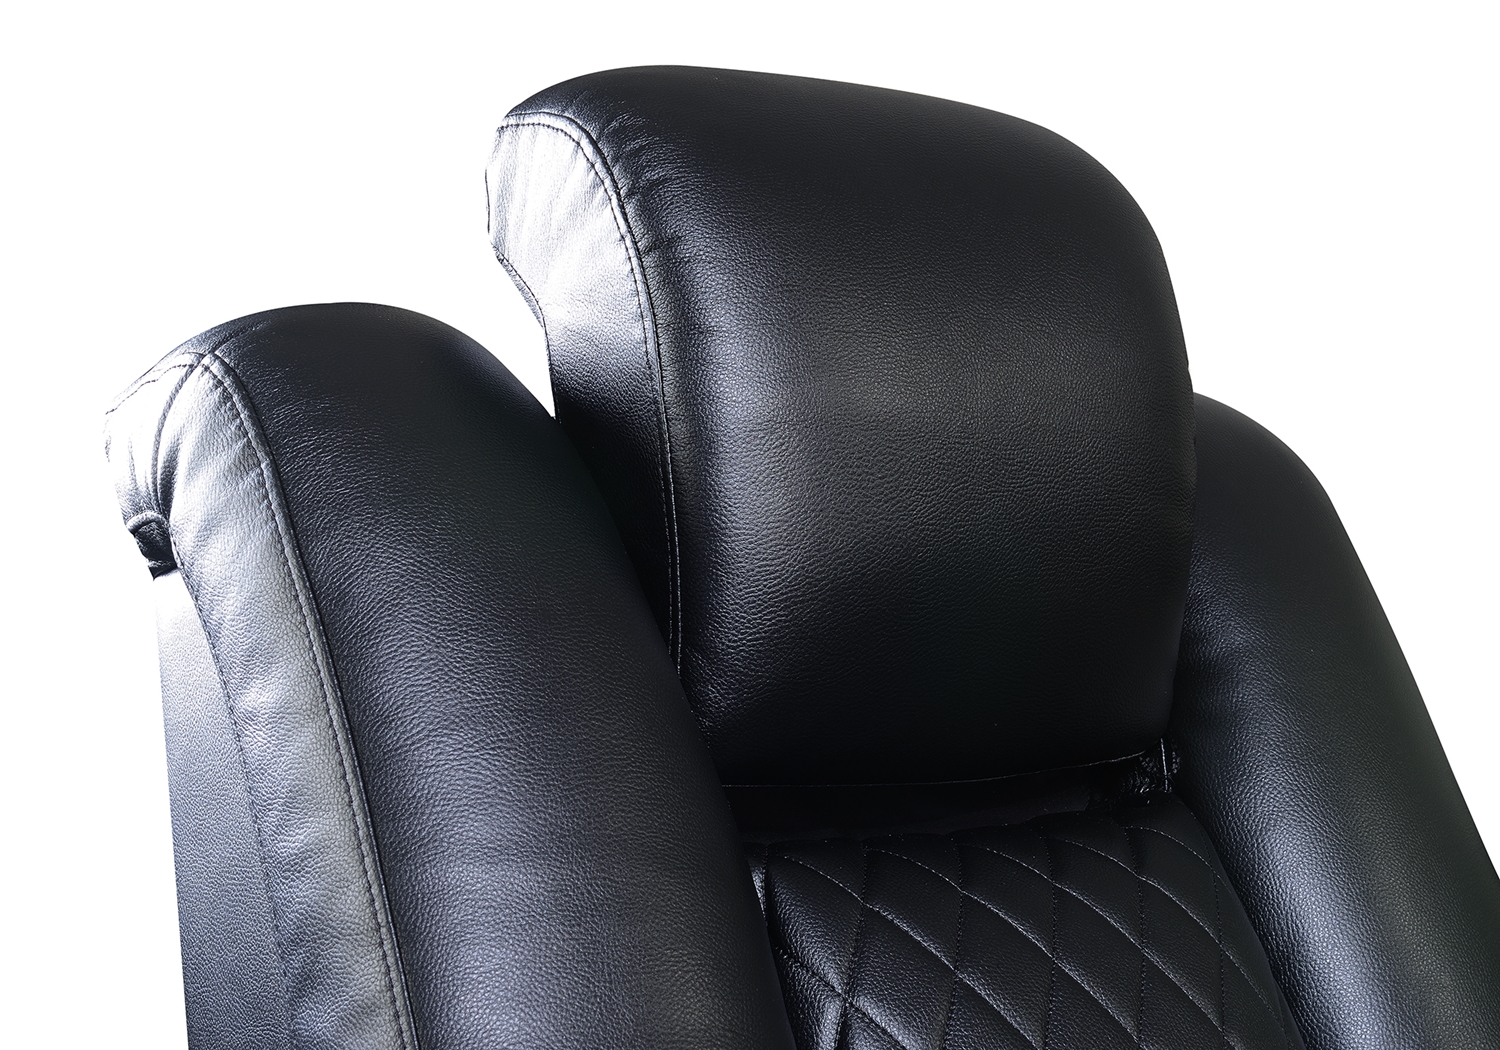 Traditional Black Accent Chair - Click Image to Close